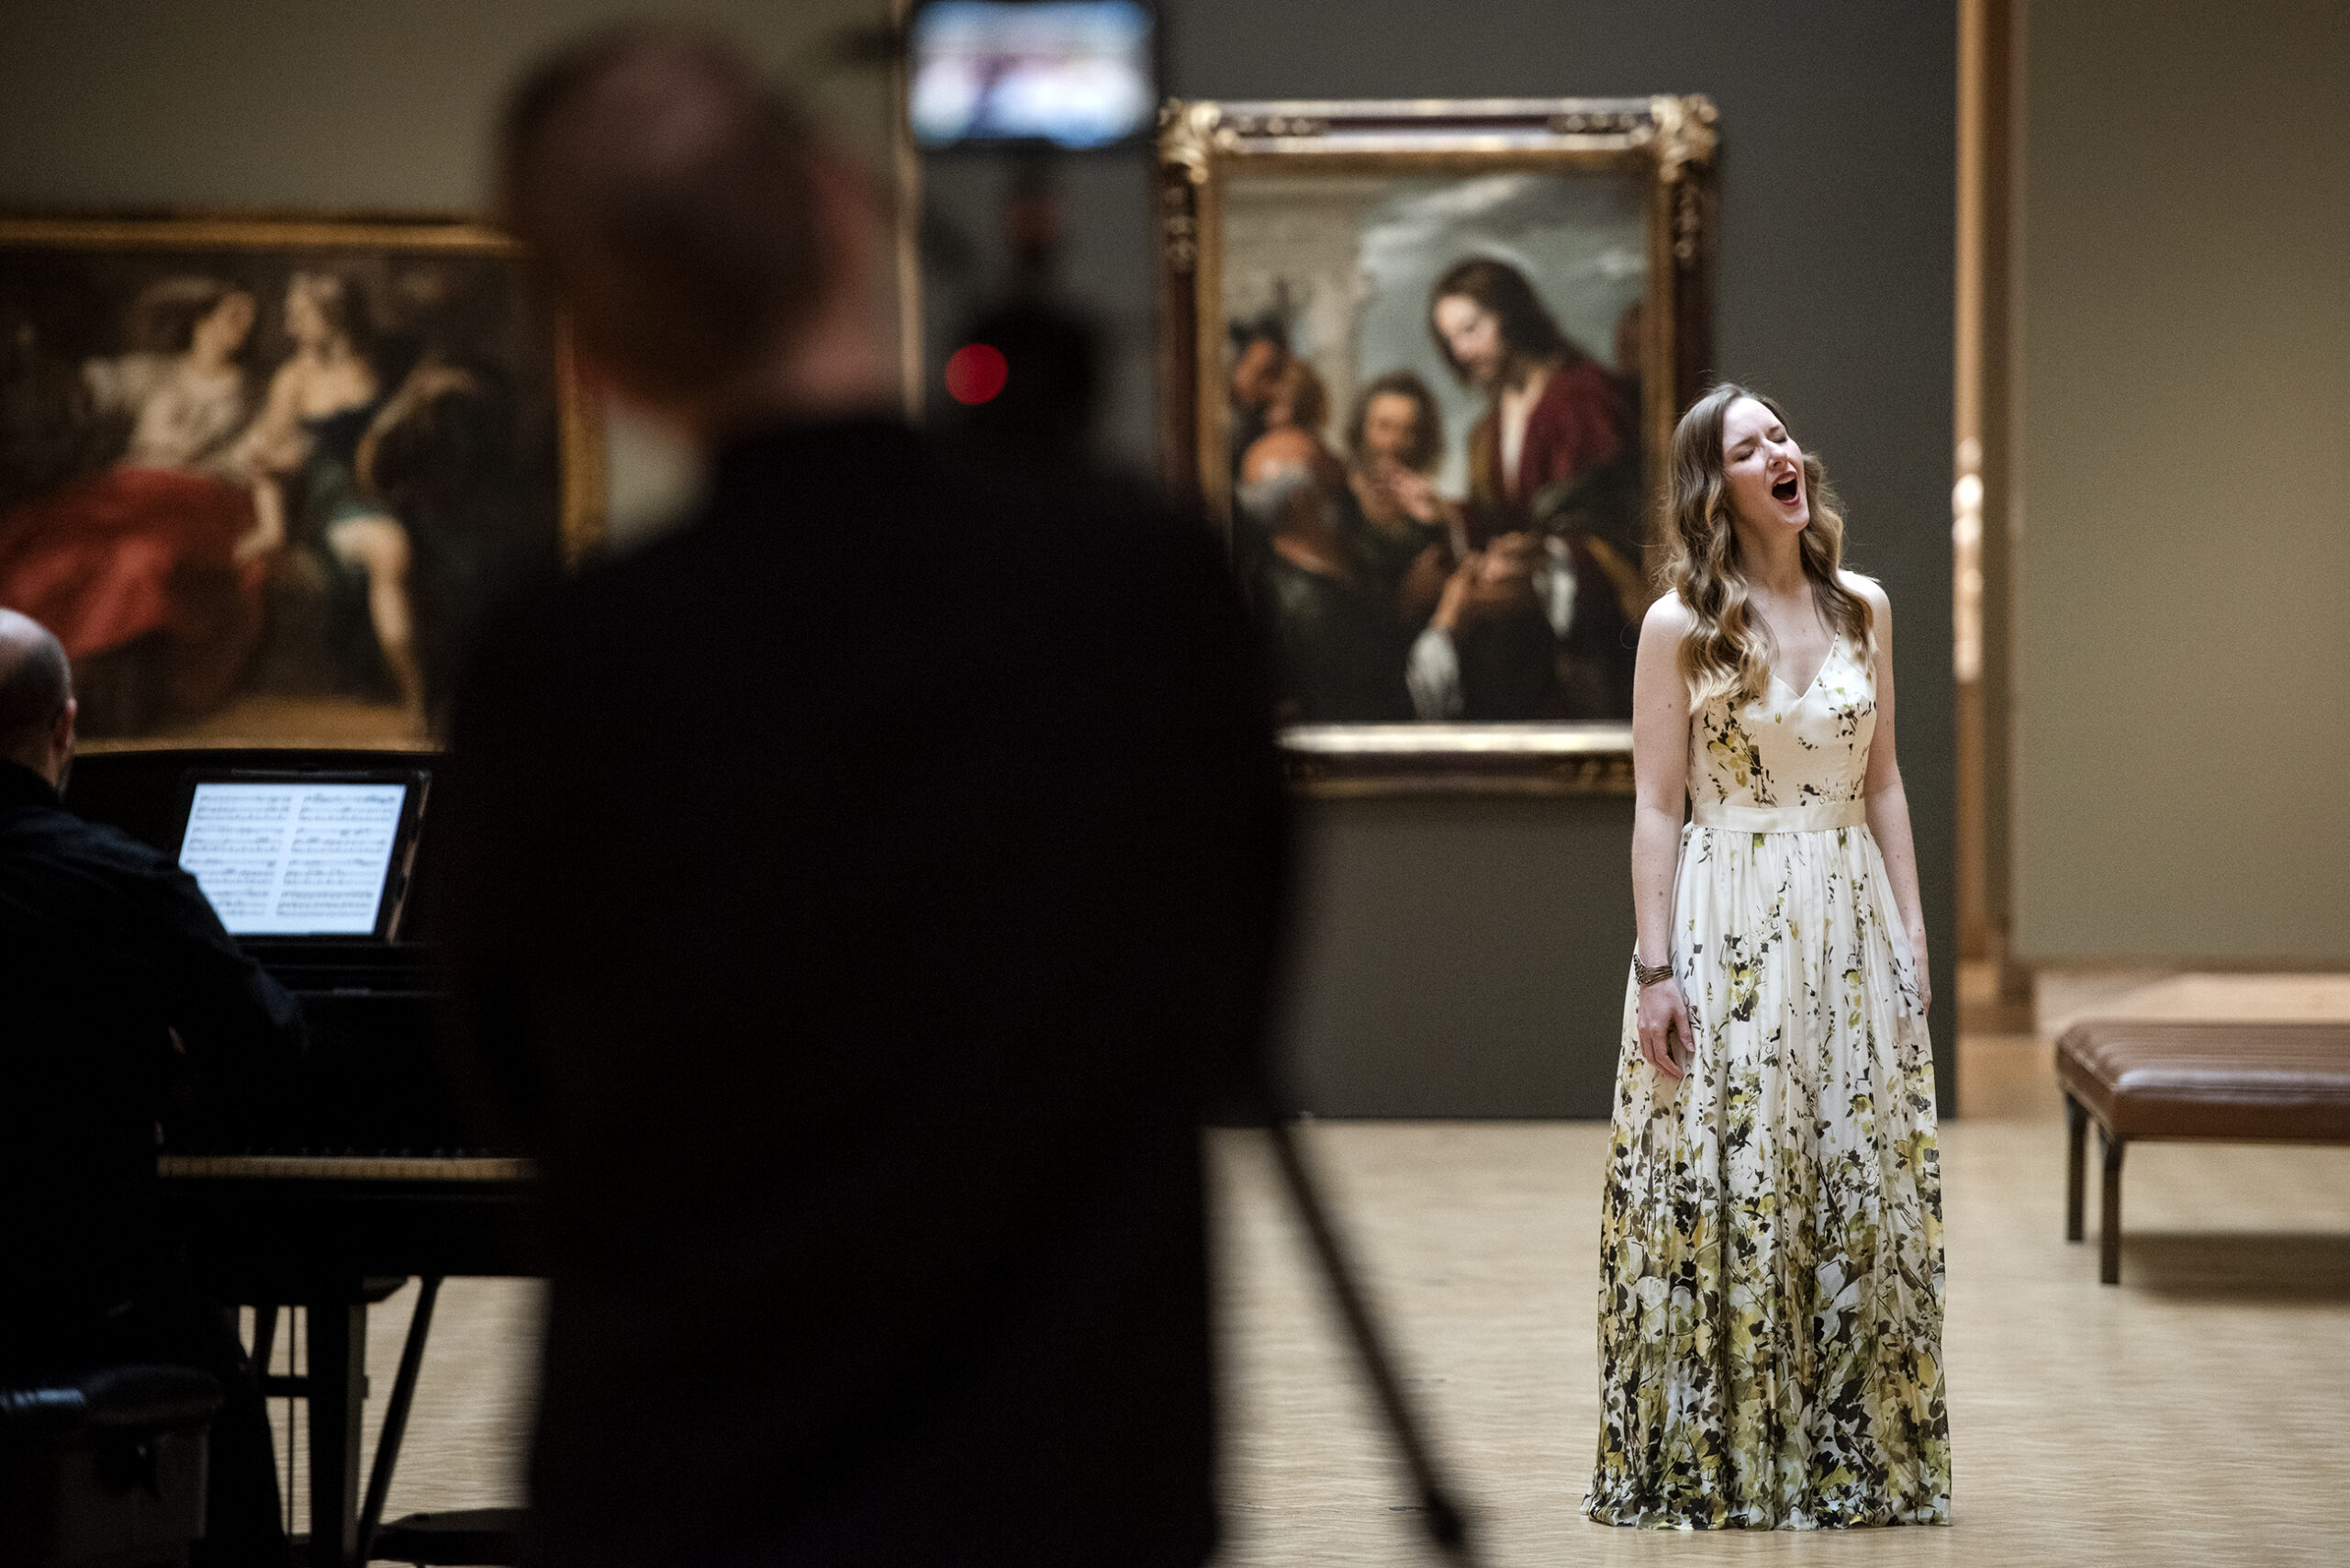 A singer in a long white floral gown tilts her head back as she belts a note surrounded by paintings in a museum.